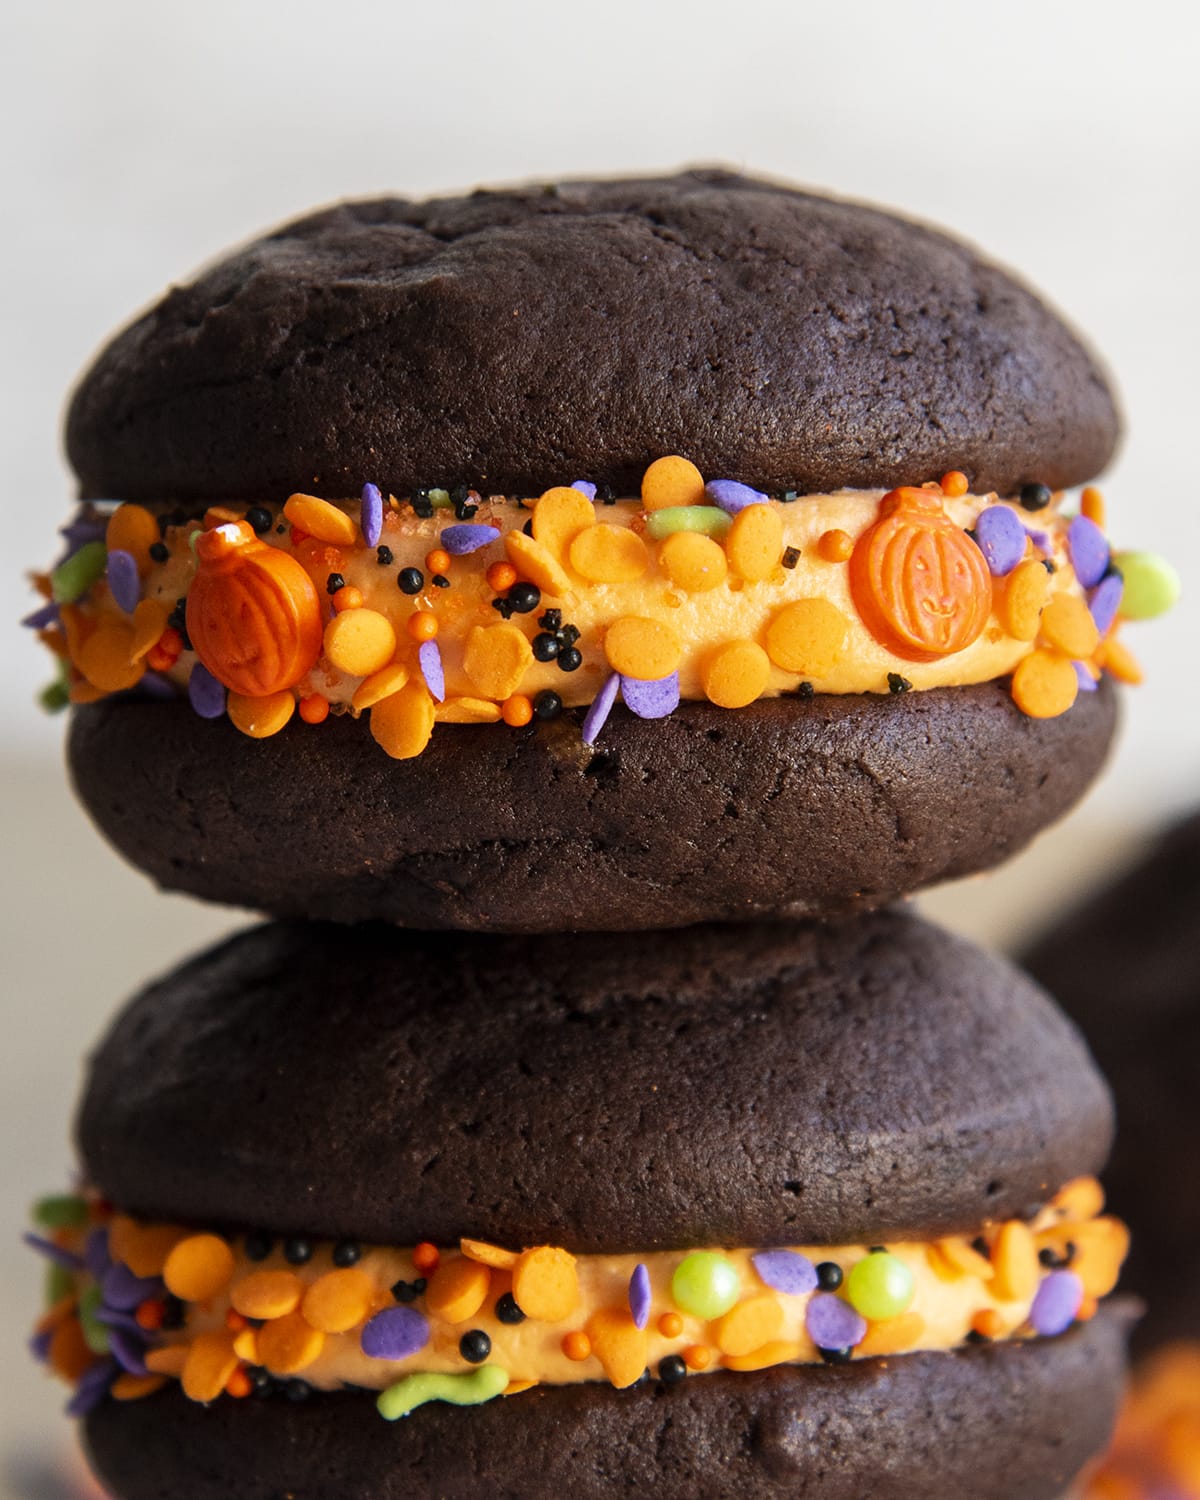 A close up of a chocolate whoopie pie sandwich with orange buttercream and Halloween sprinkles.